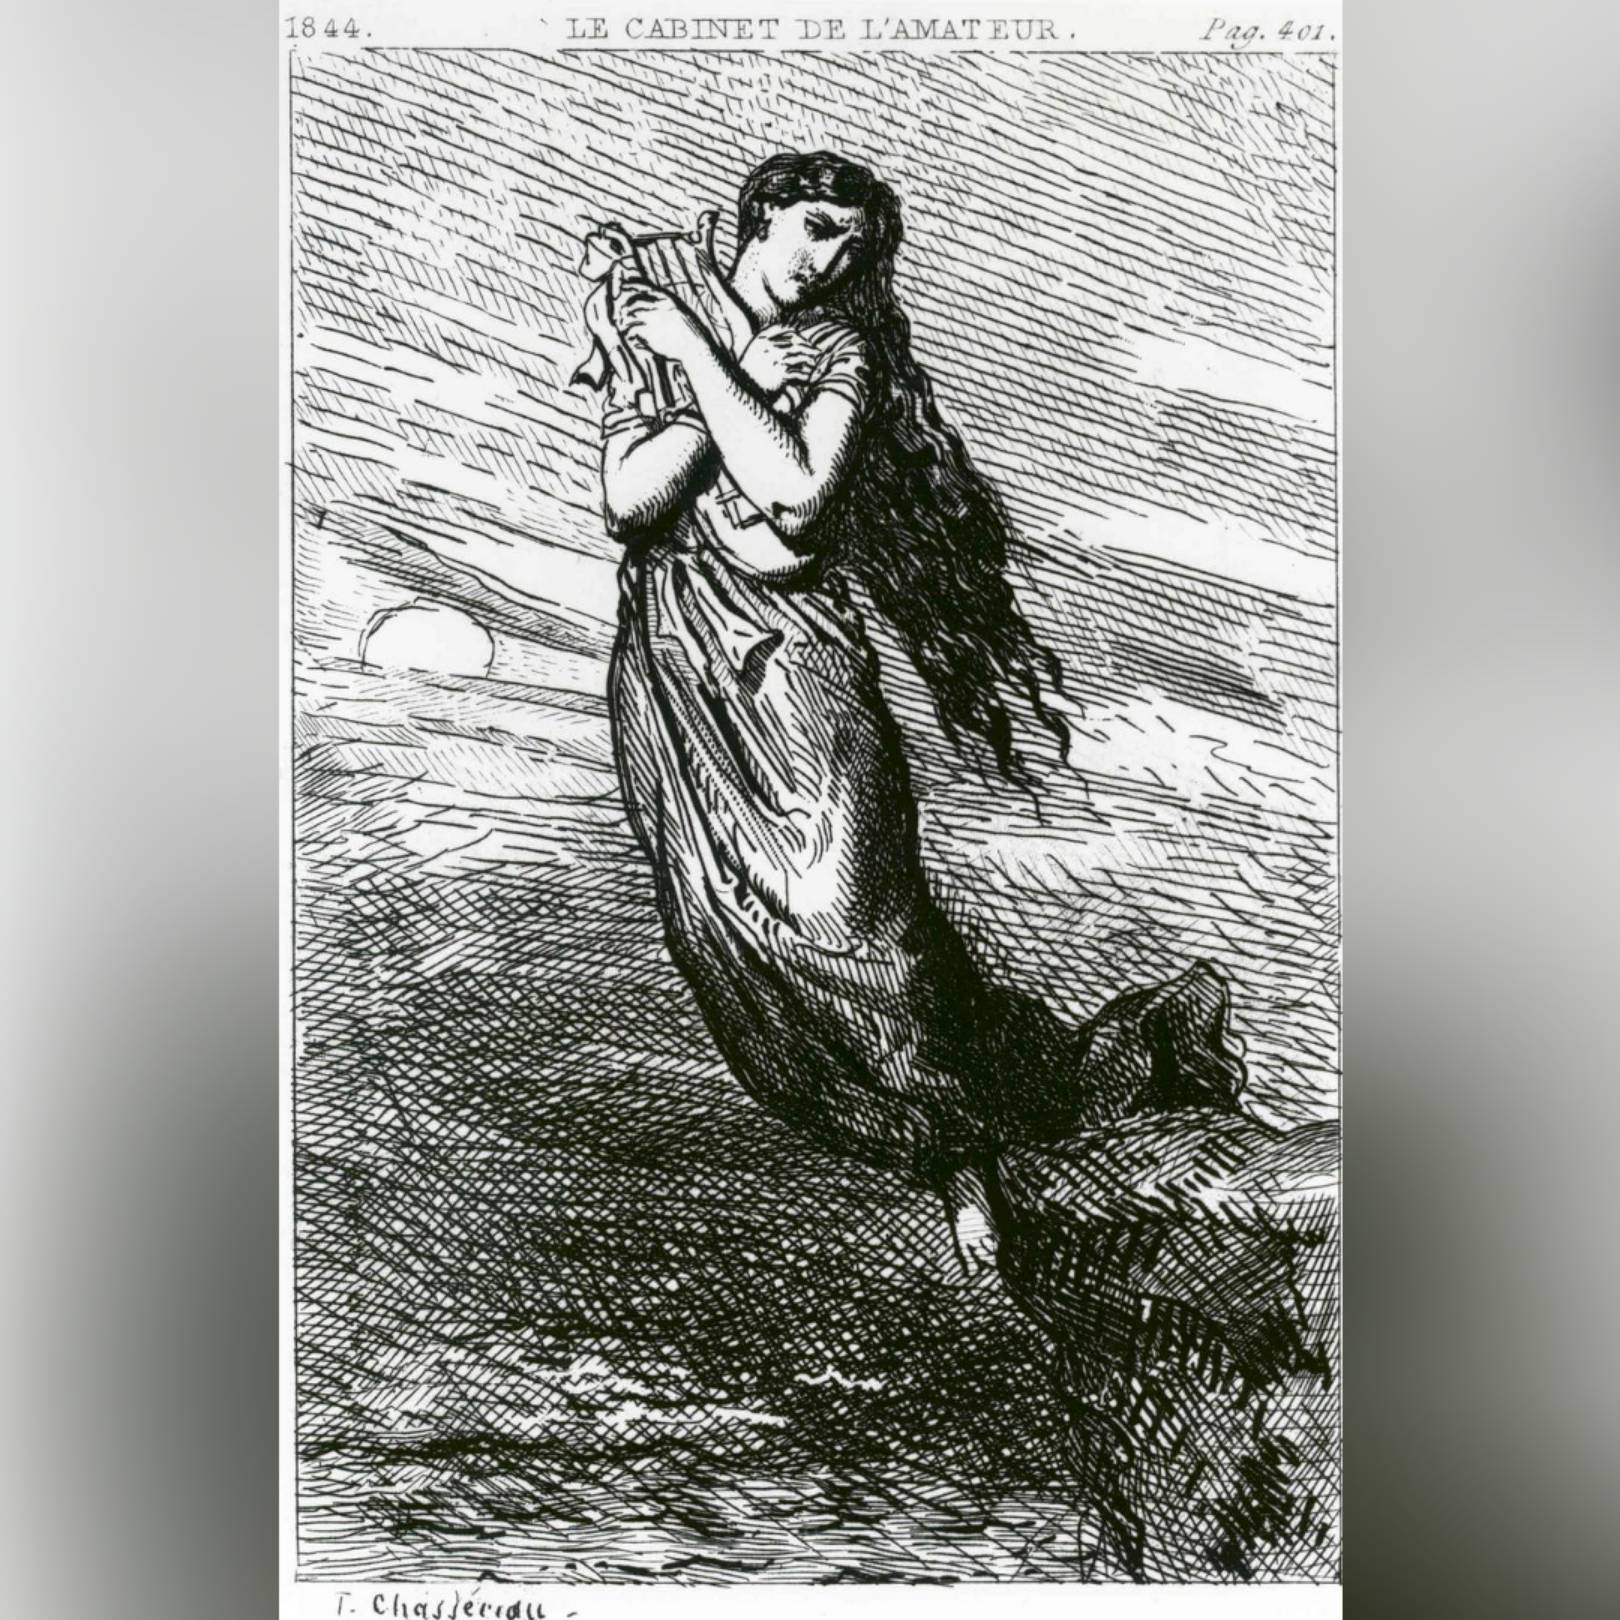 Sapho (Sappho), (1844) by Théodore Chassériau, etching and roulette. Purchase of the Friends of the Visual Arts, 1988.2